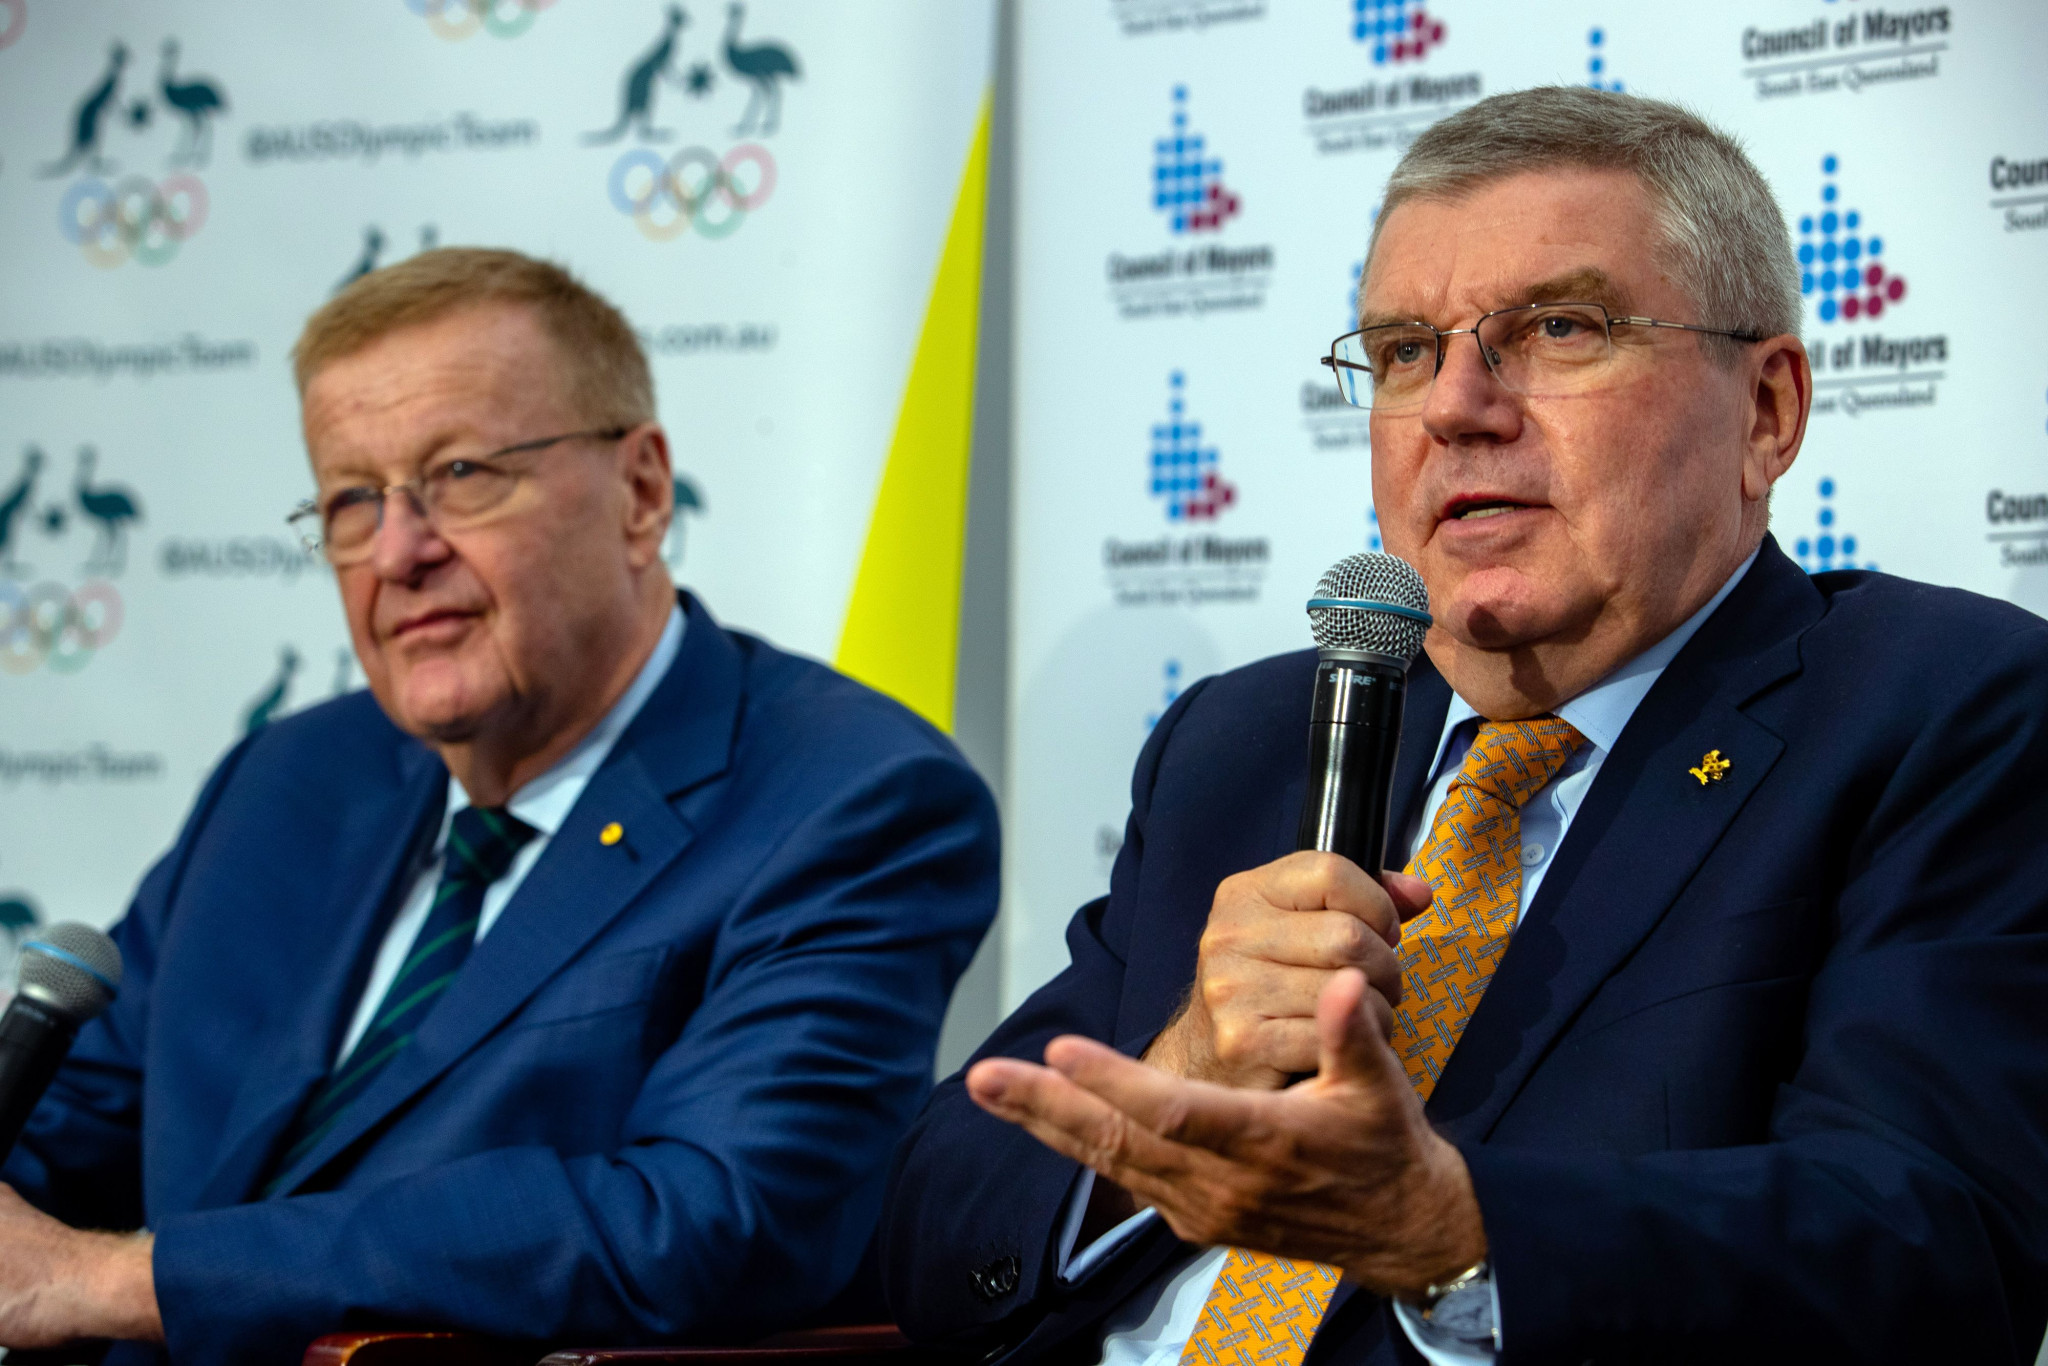 Australian Olympic Committee welcomes Queensland Government's donation in build-up to Tokyo 2020